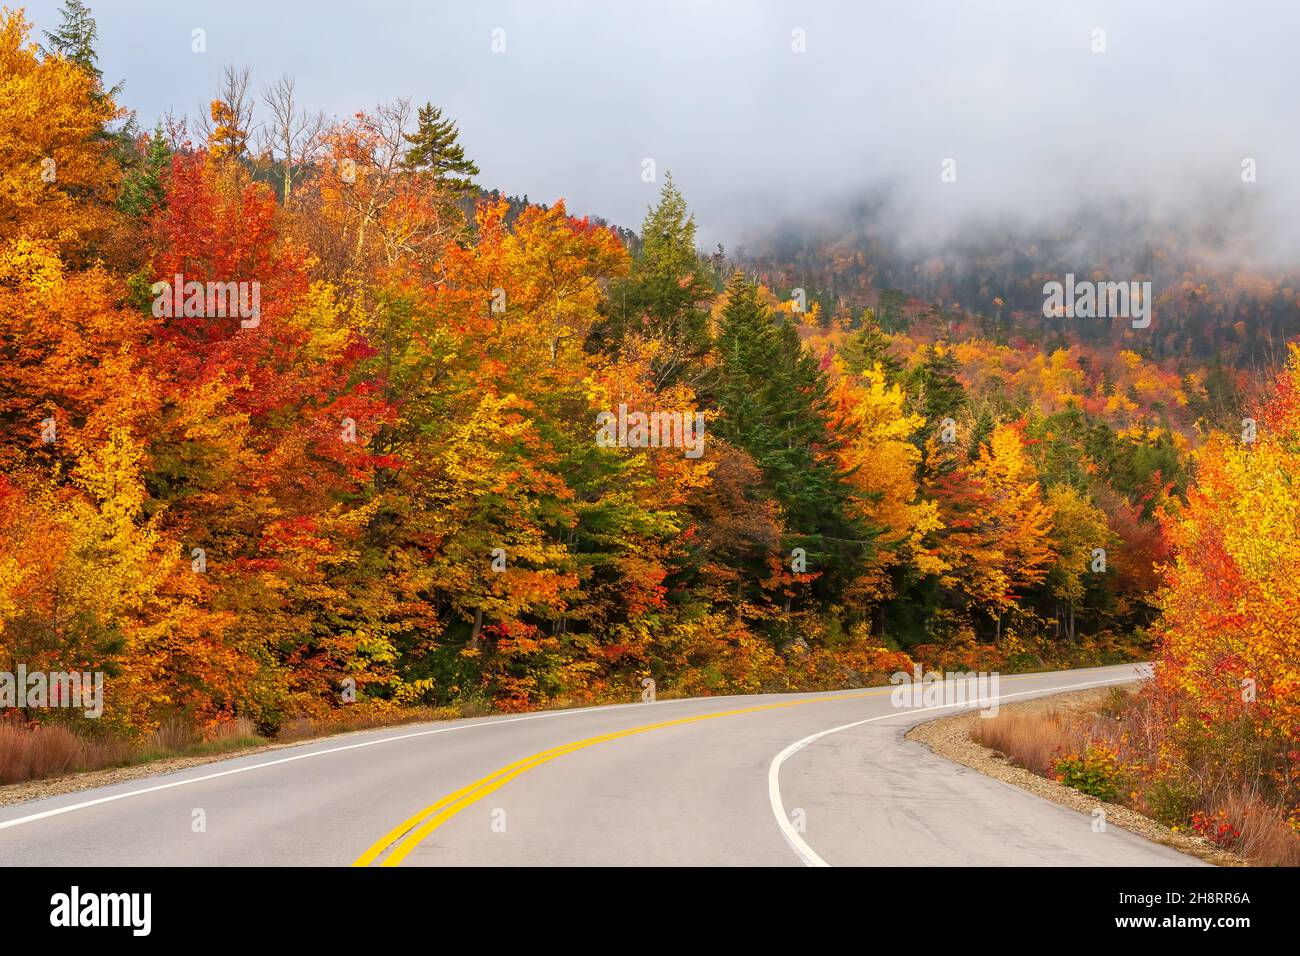 Colorful autumn foliage appears, as the fog lifts, along a curvy mountain road in the White Mountains of New Hampshire, USA. Stock Photo